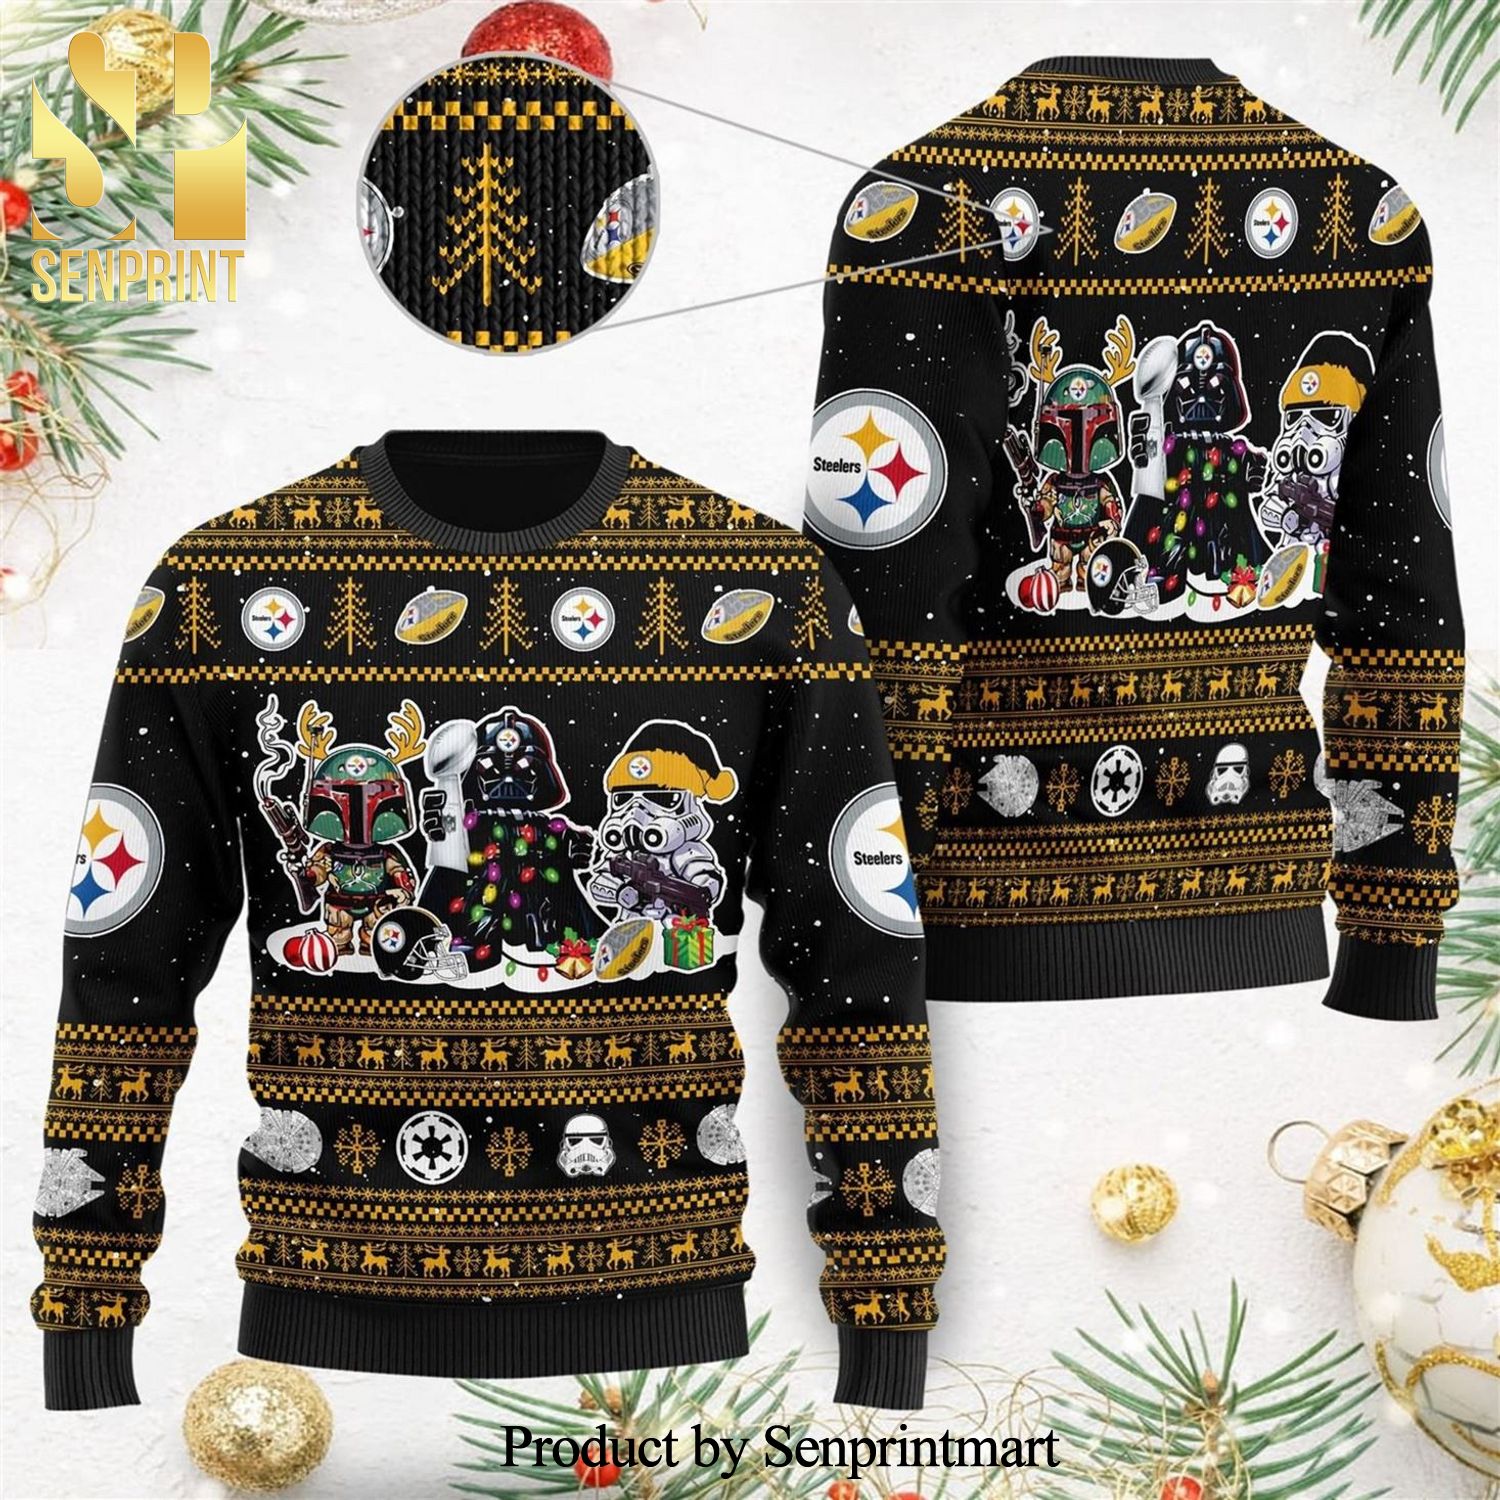 Pittsburgh Steelers Star Wars Knitted Ugly Christmas Sweater